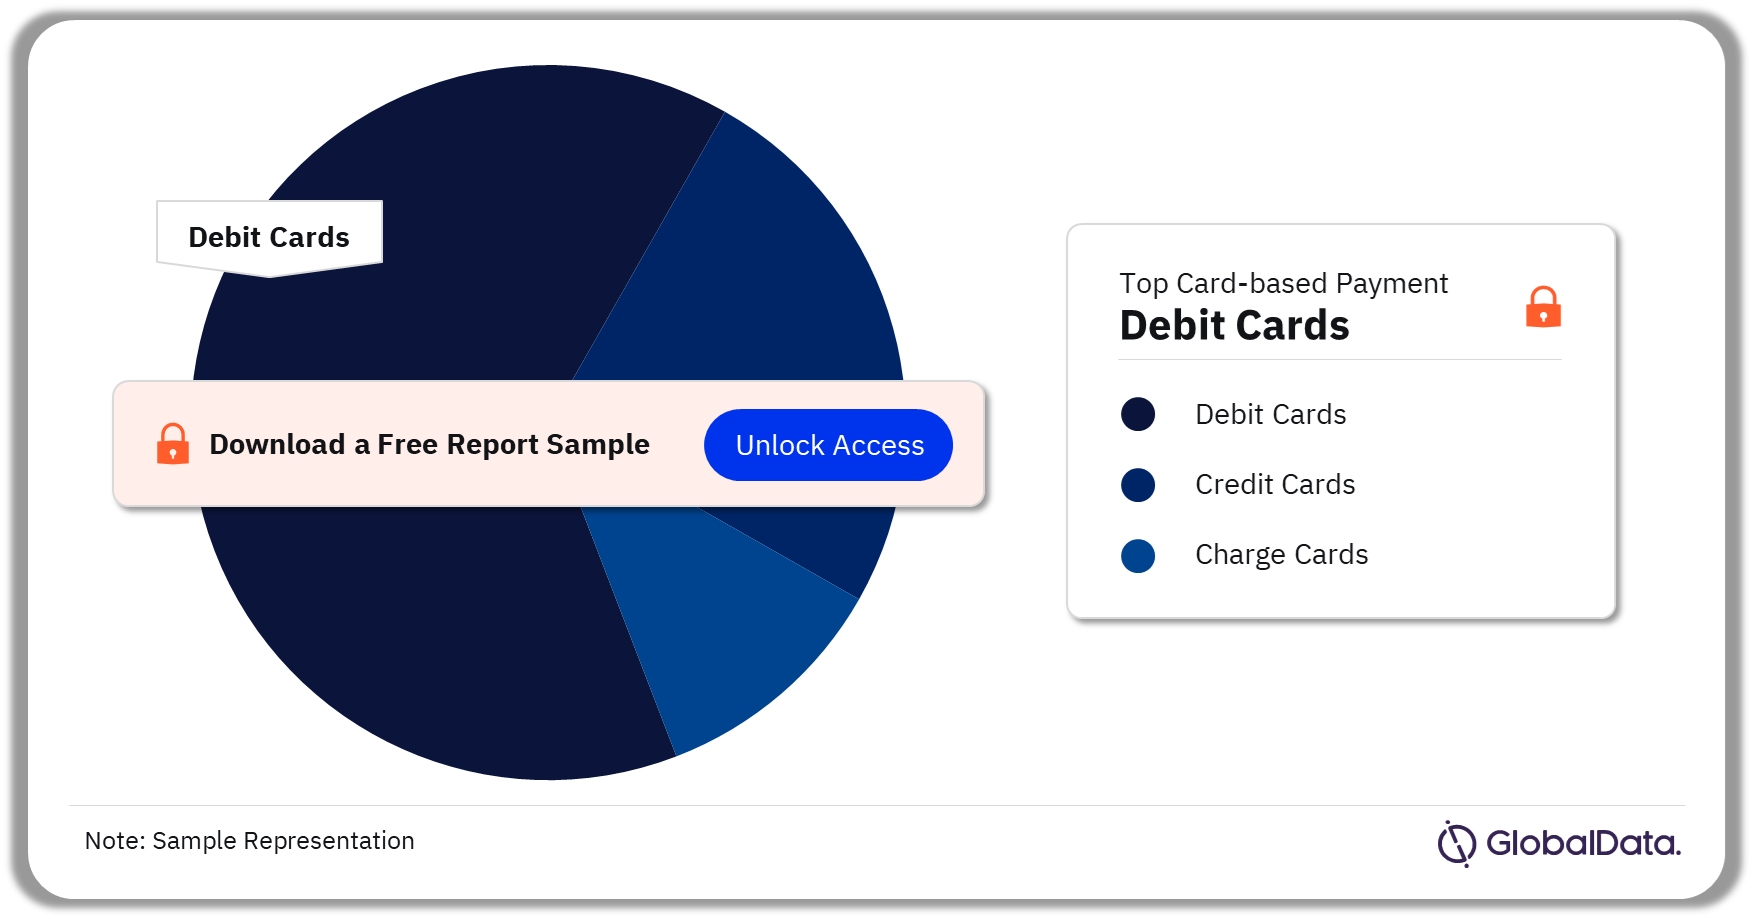 Philippines Cards and Payment Market Analysis by Segments, 2023 (%)